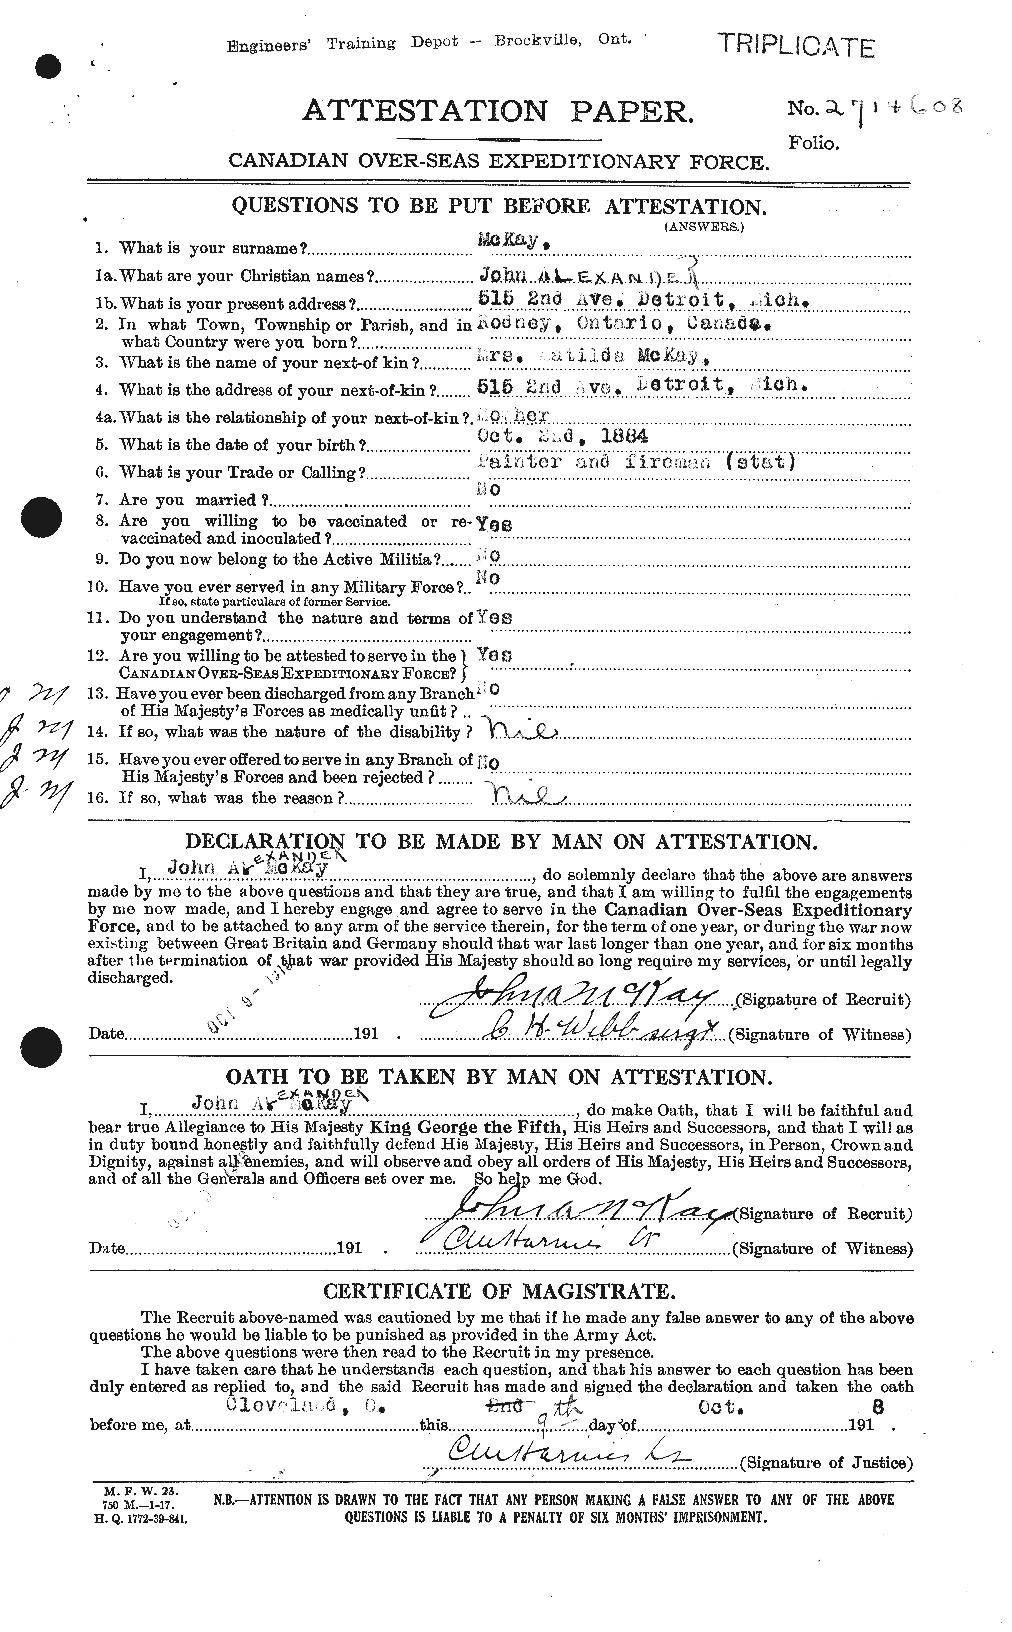 Personnel Records of the First World War - CEF 527026a